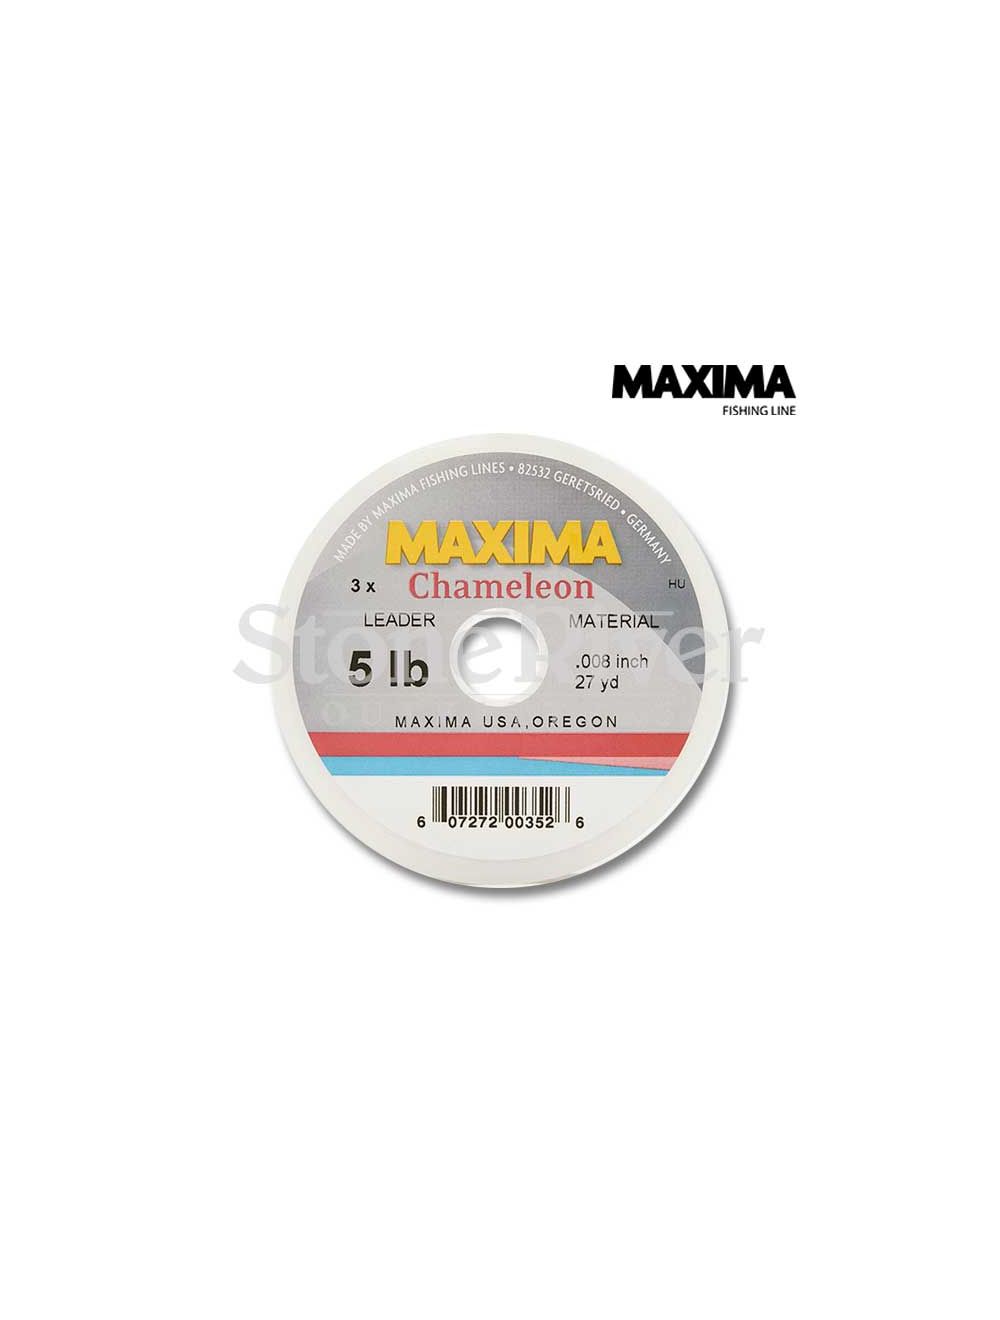 3 Maxima Chameleon Fly Fishing Leader/Tippet Material 10lb 27yds ~ New 